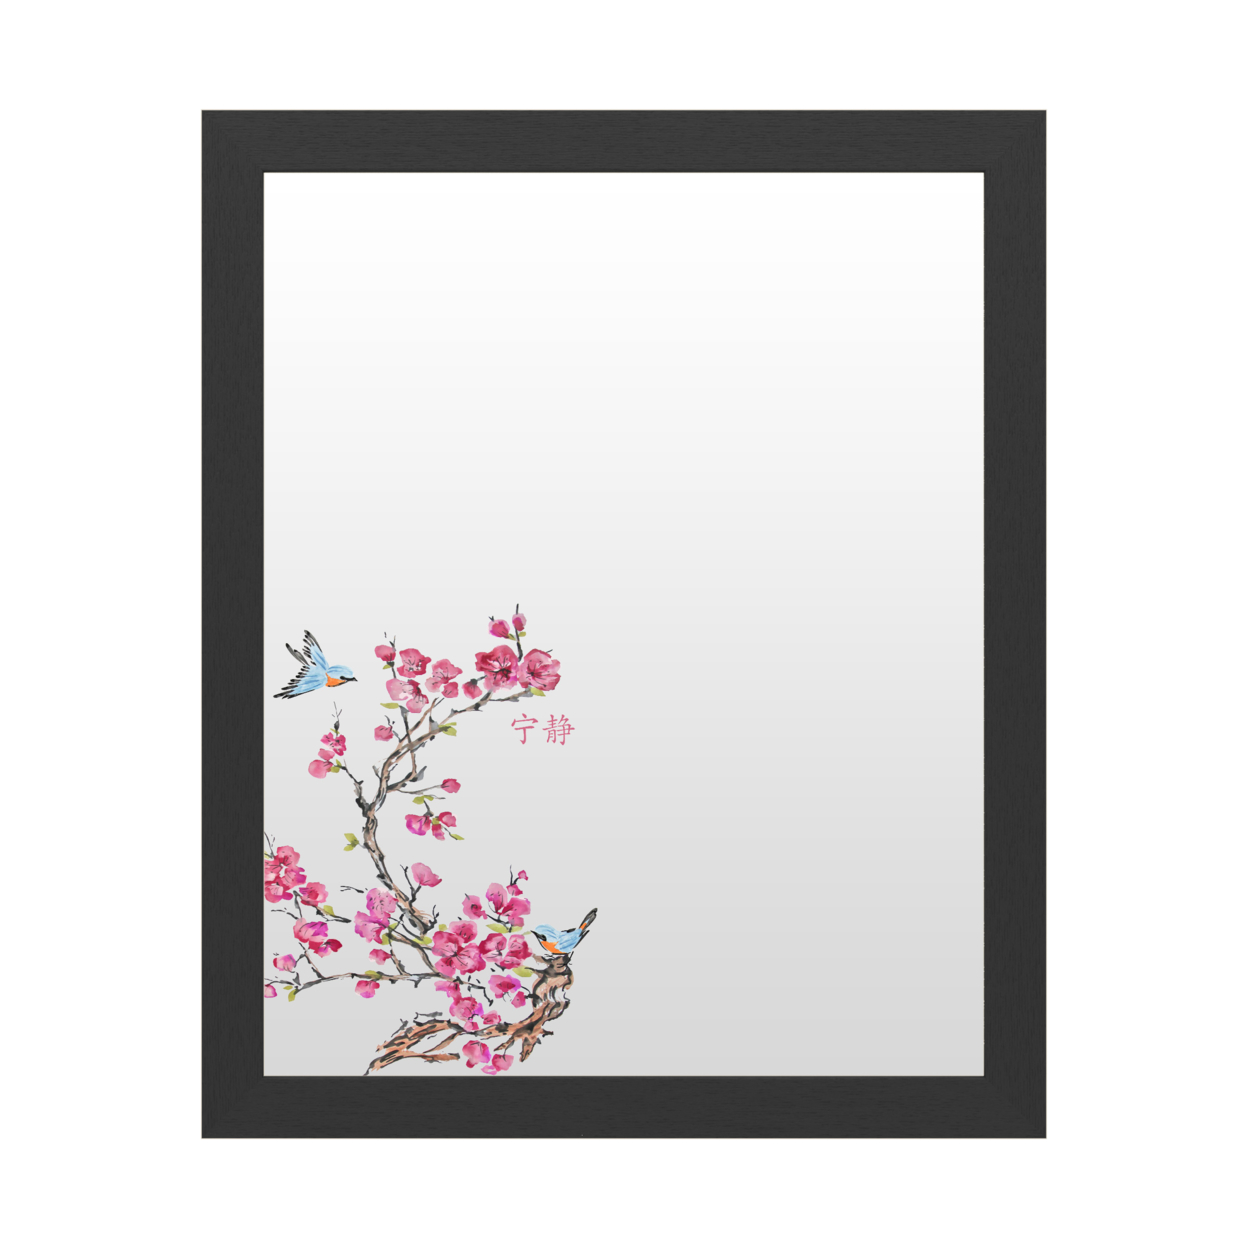 Dry Erase 16 X 20 Marker Board With Printed Artwork - Jean Plout Cherry Blossom Serenity Birds White Board - Ready To Hang